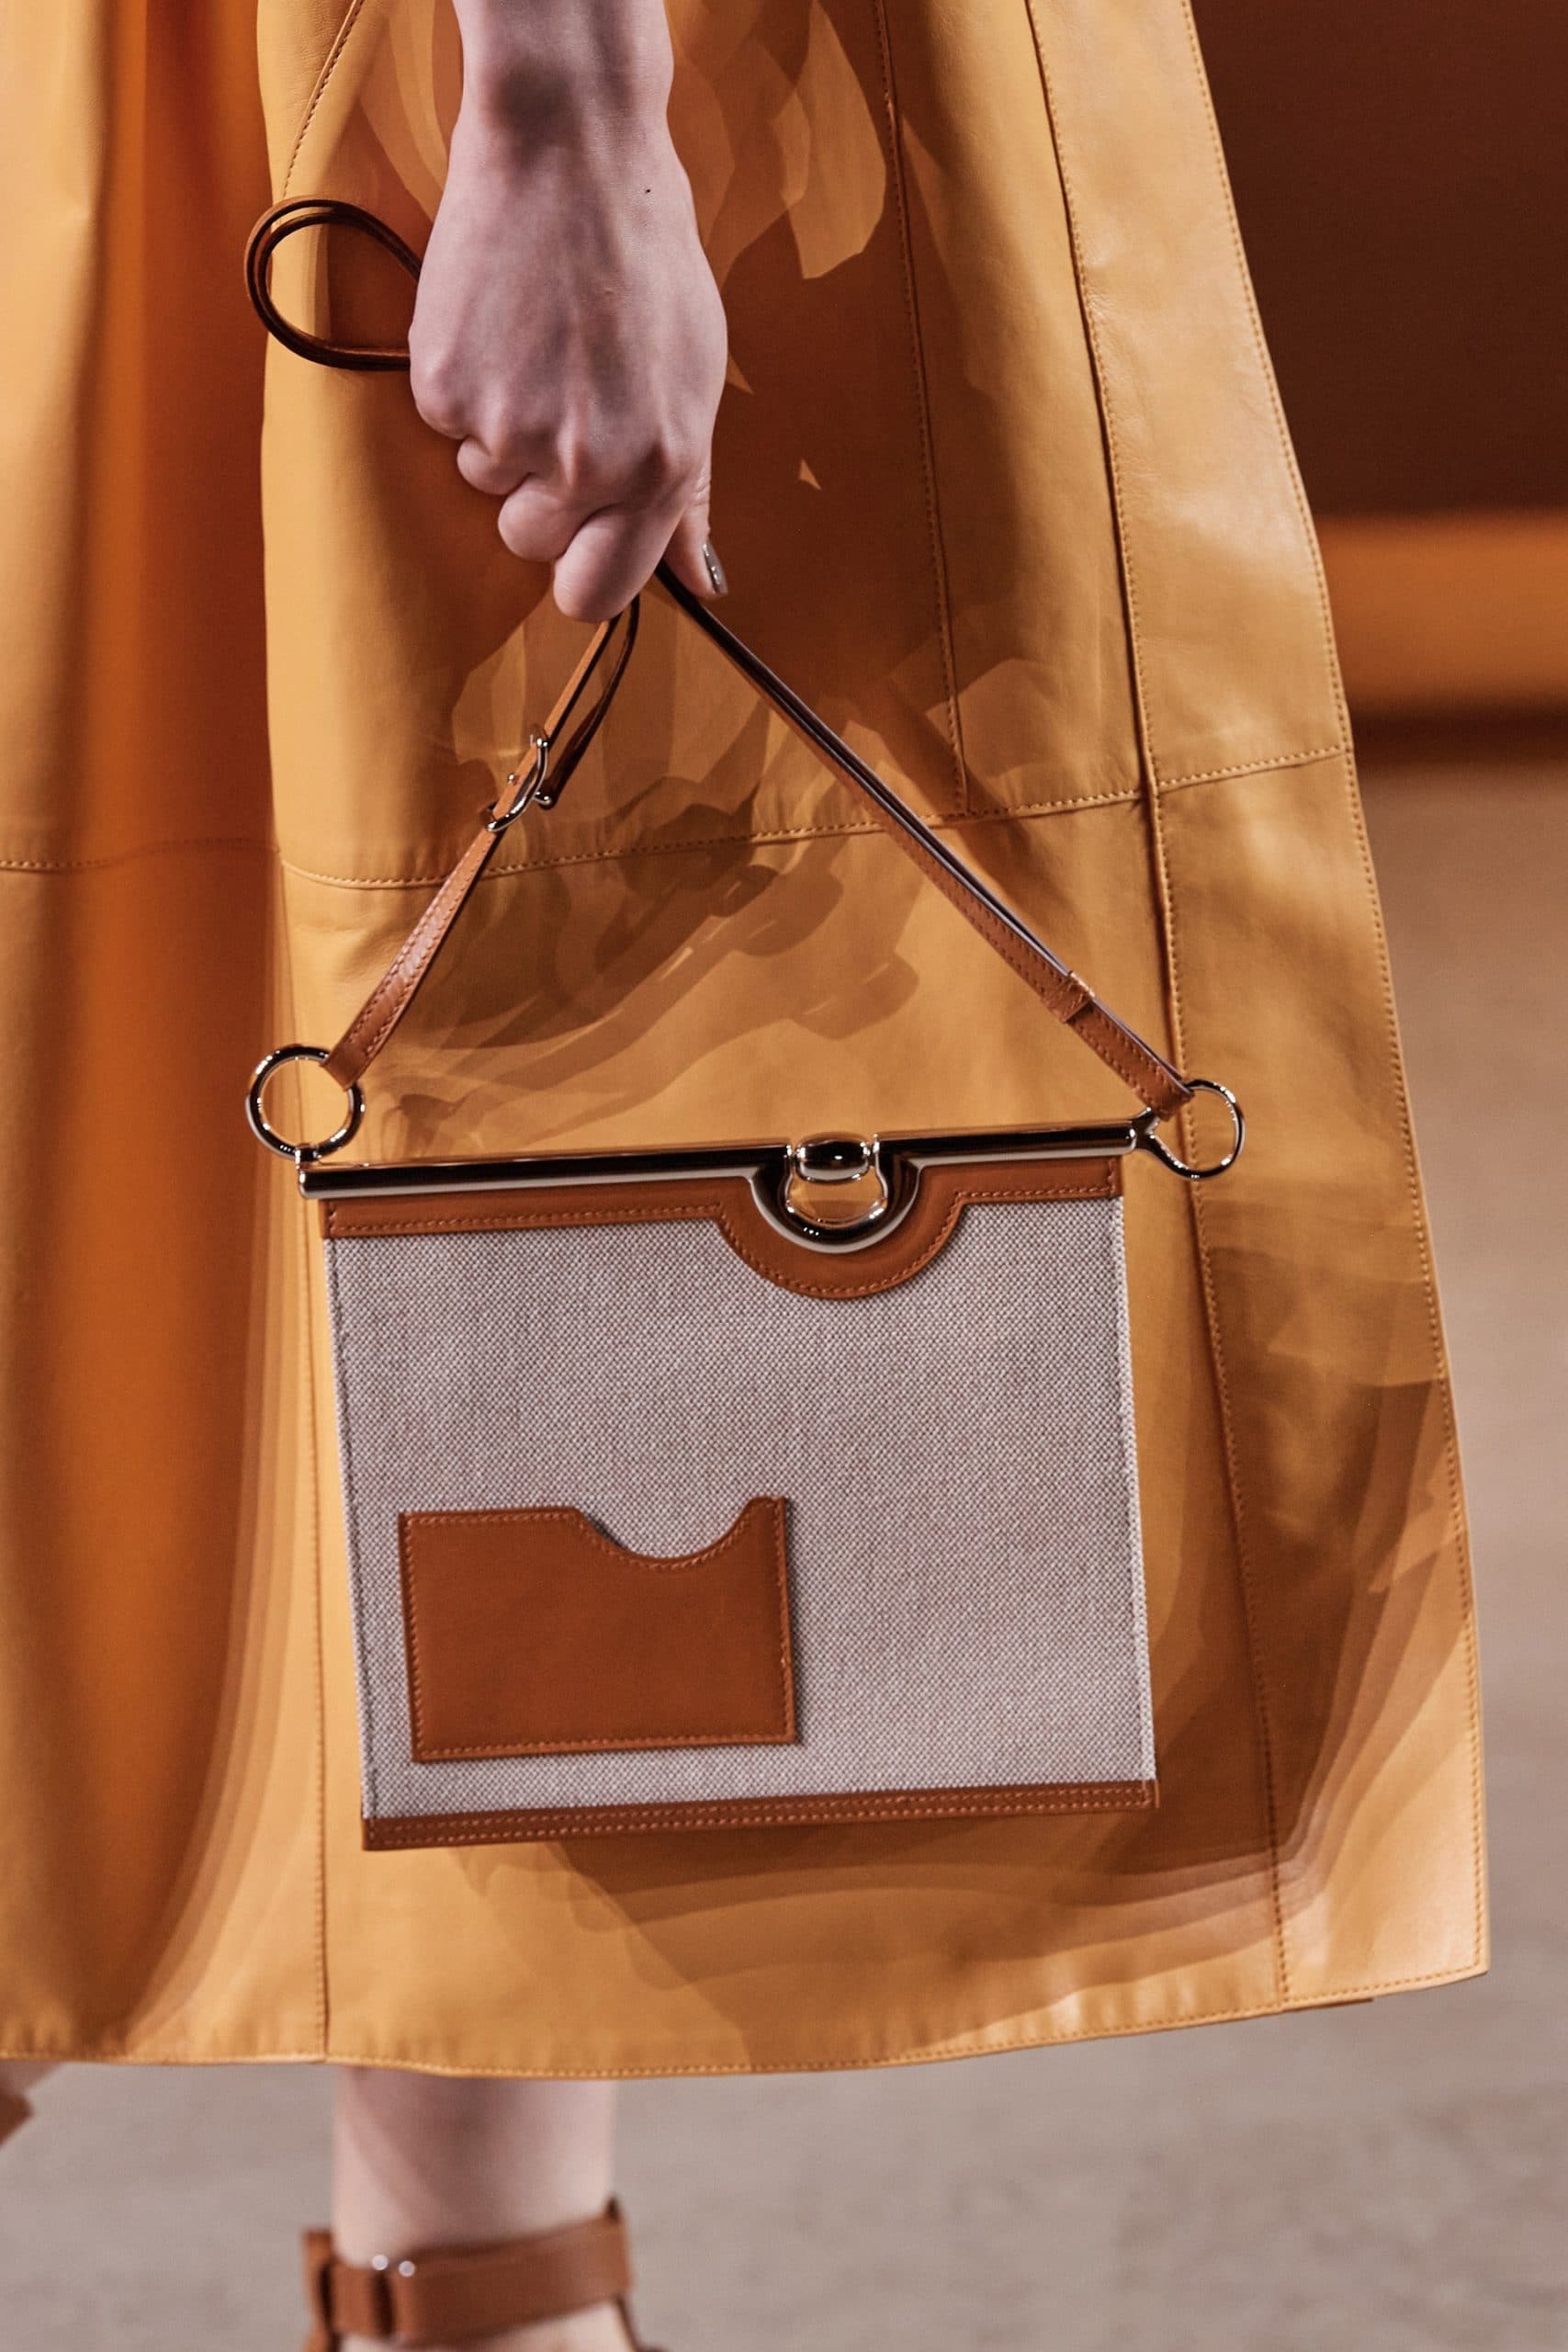 Hermes Garden Party Bag Reference Guide - Spotted Fashion